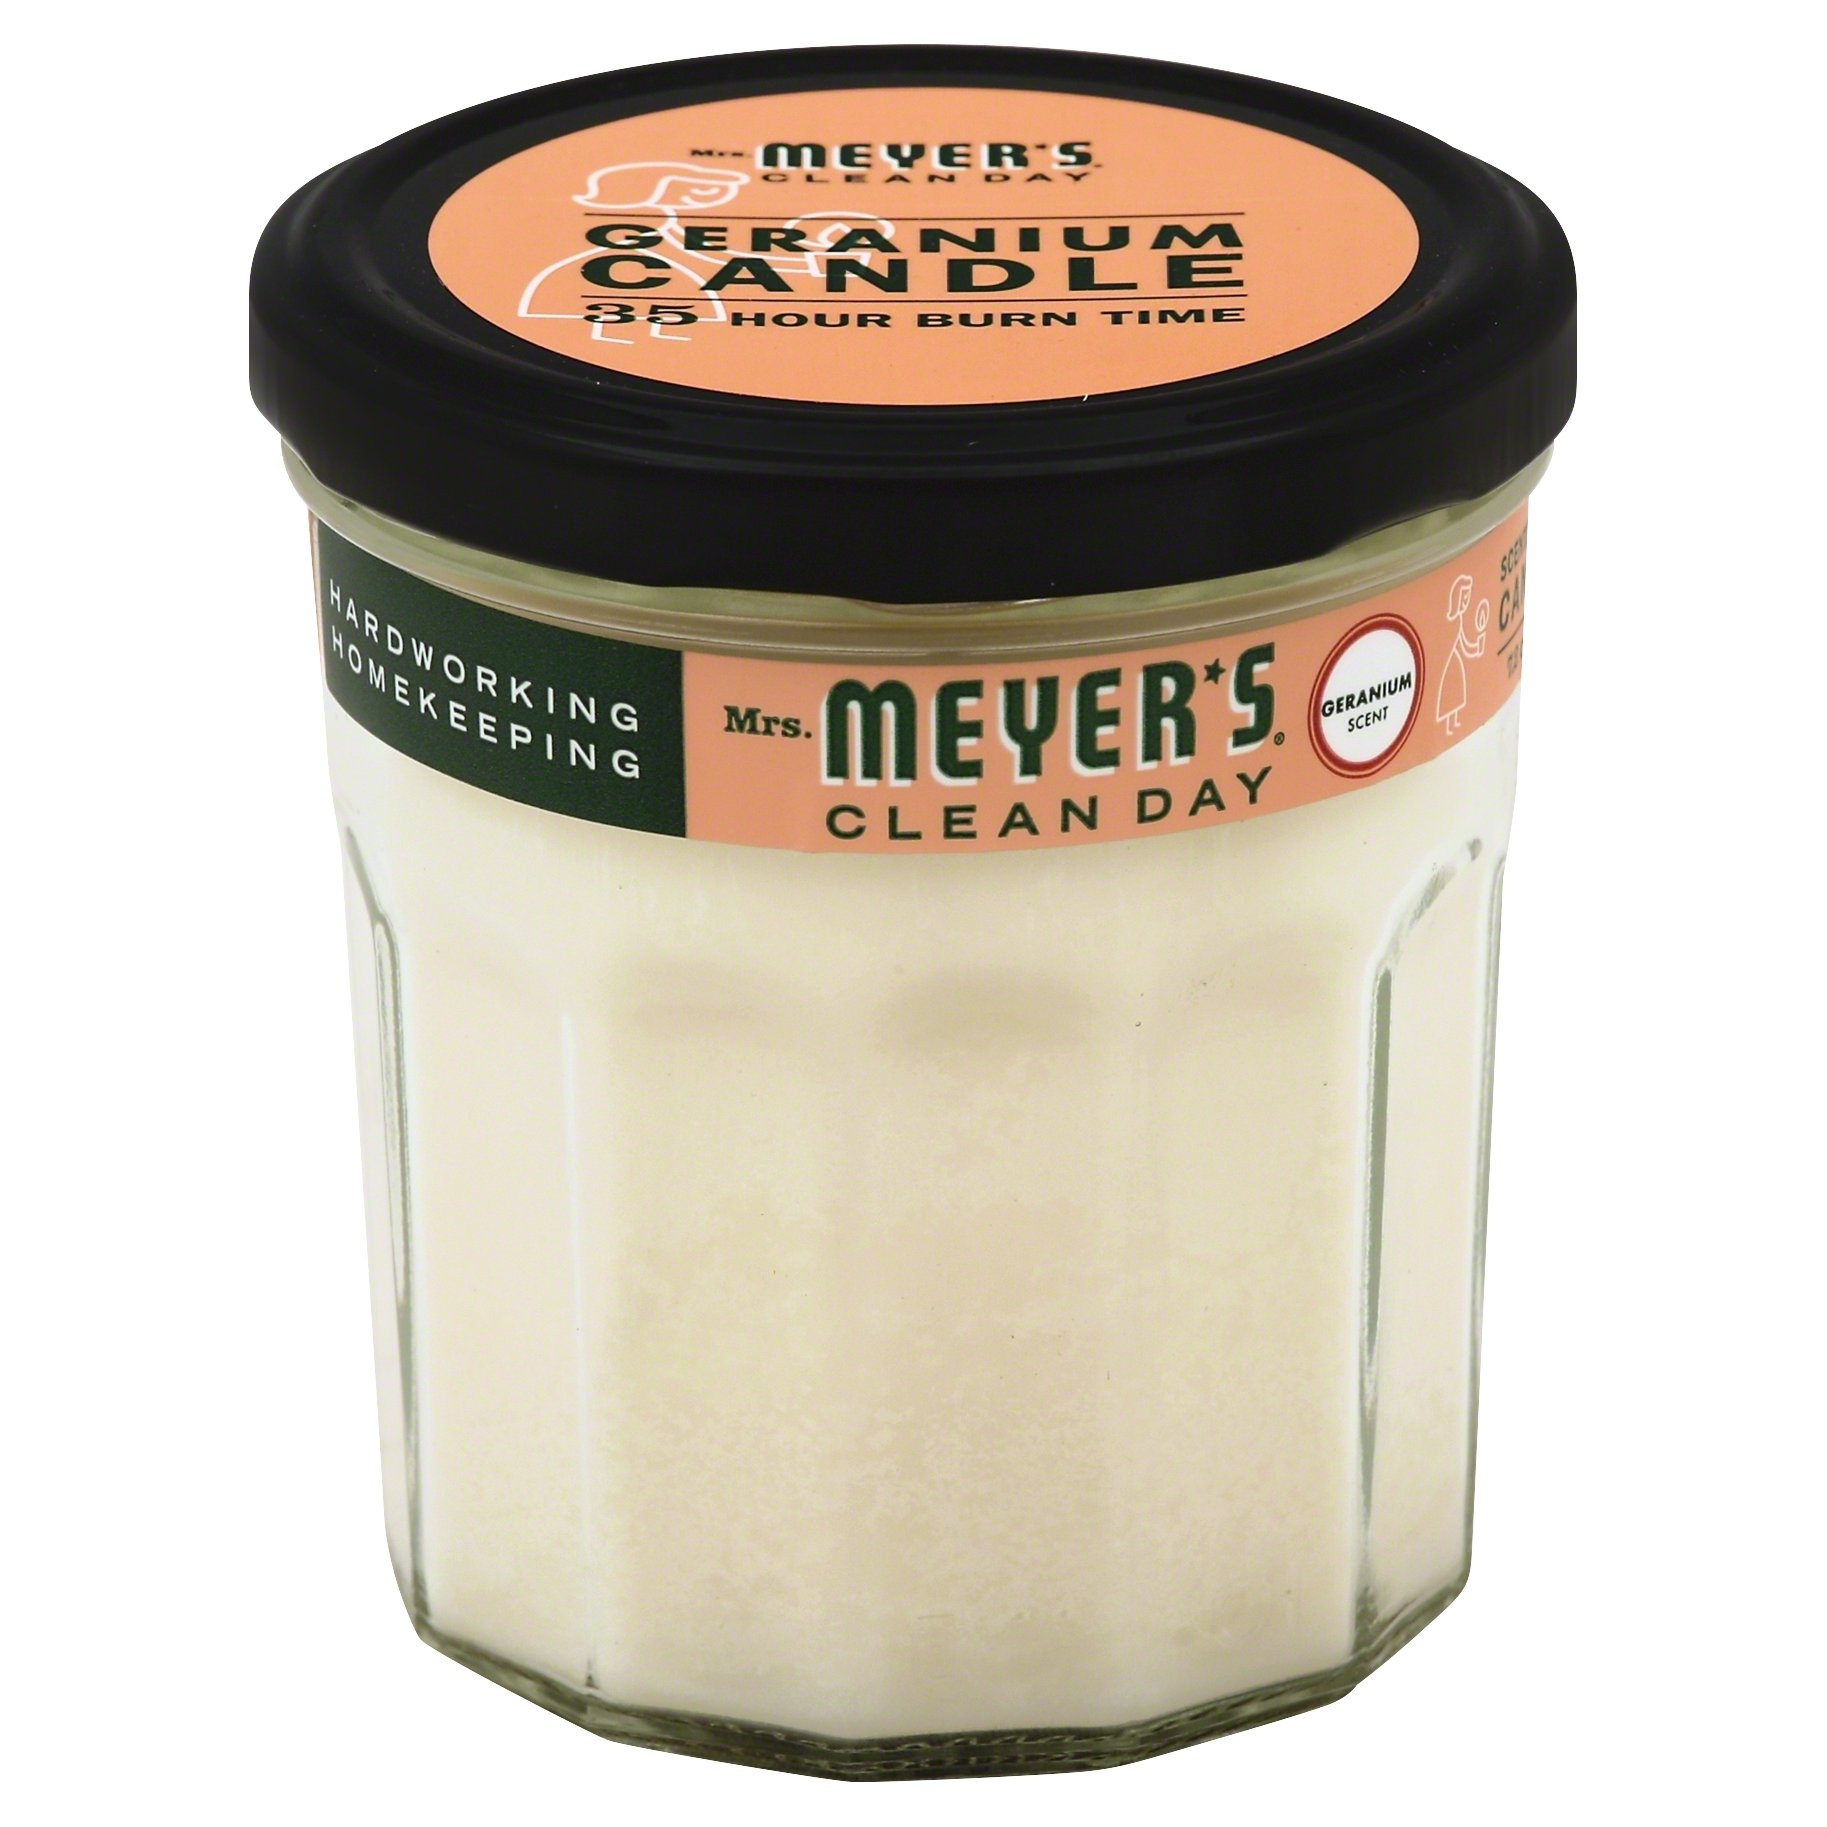 slide 1 of 1, Mrs. Meyer's Clean Day Scented Soy Candle Geranium Scent, 7.2 oz